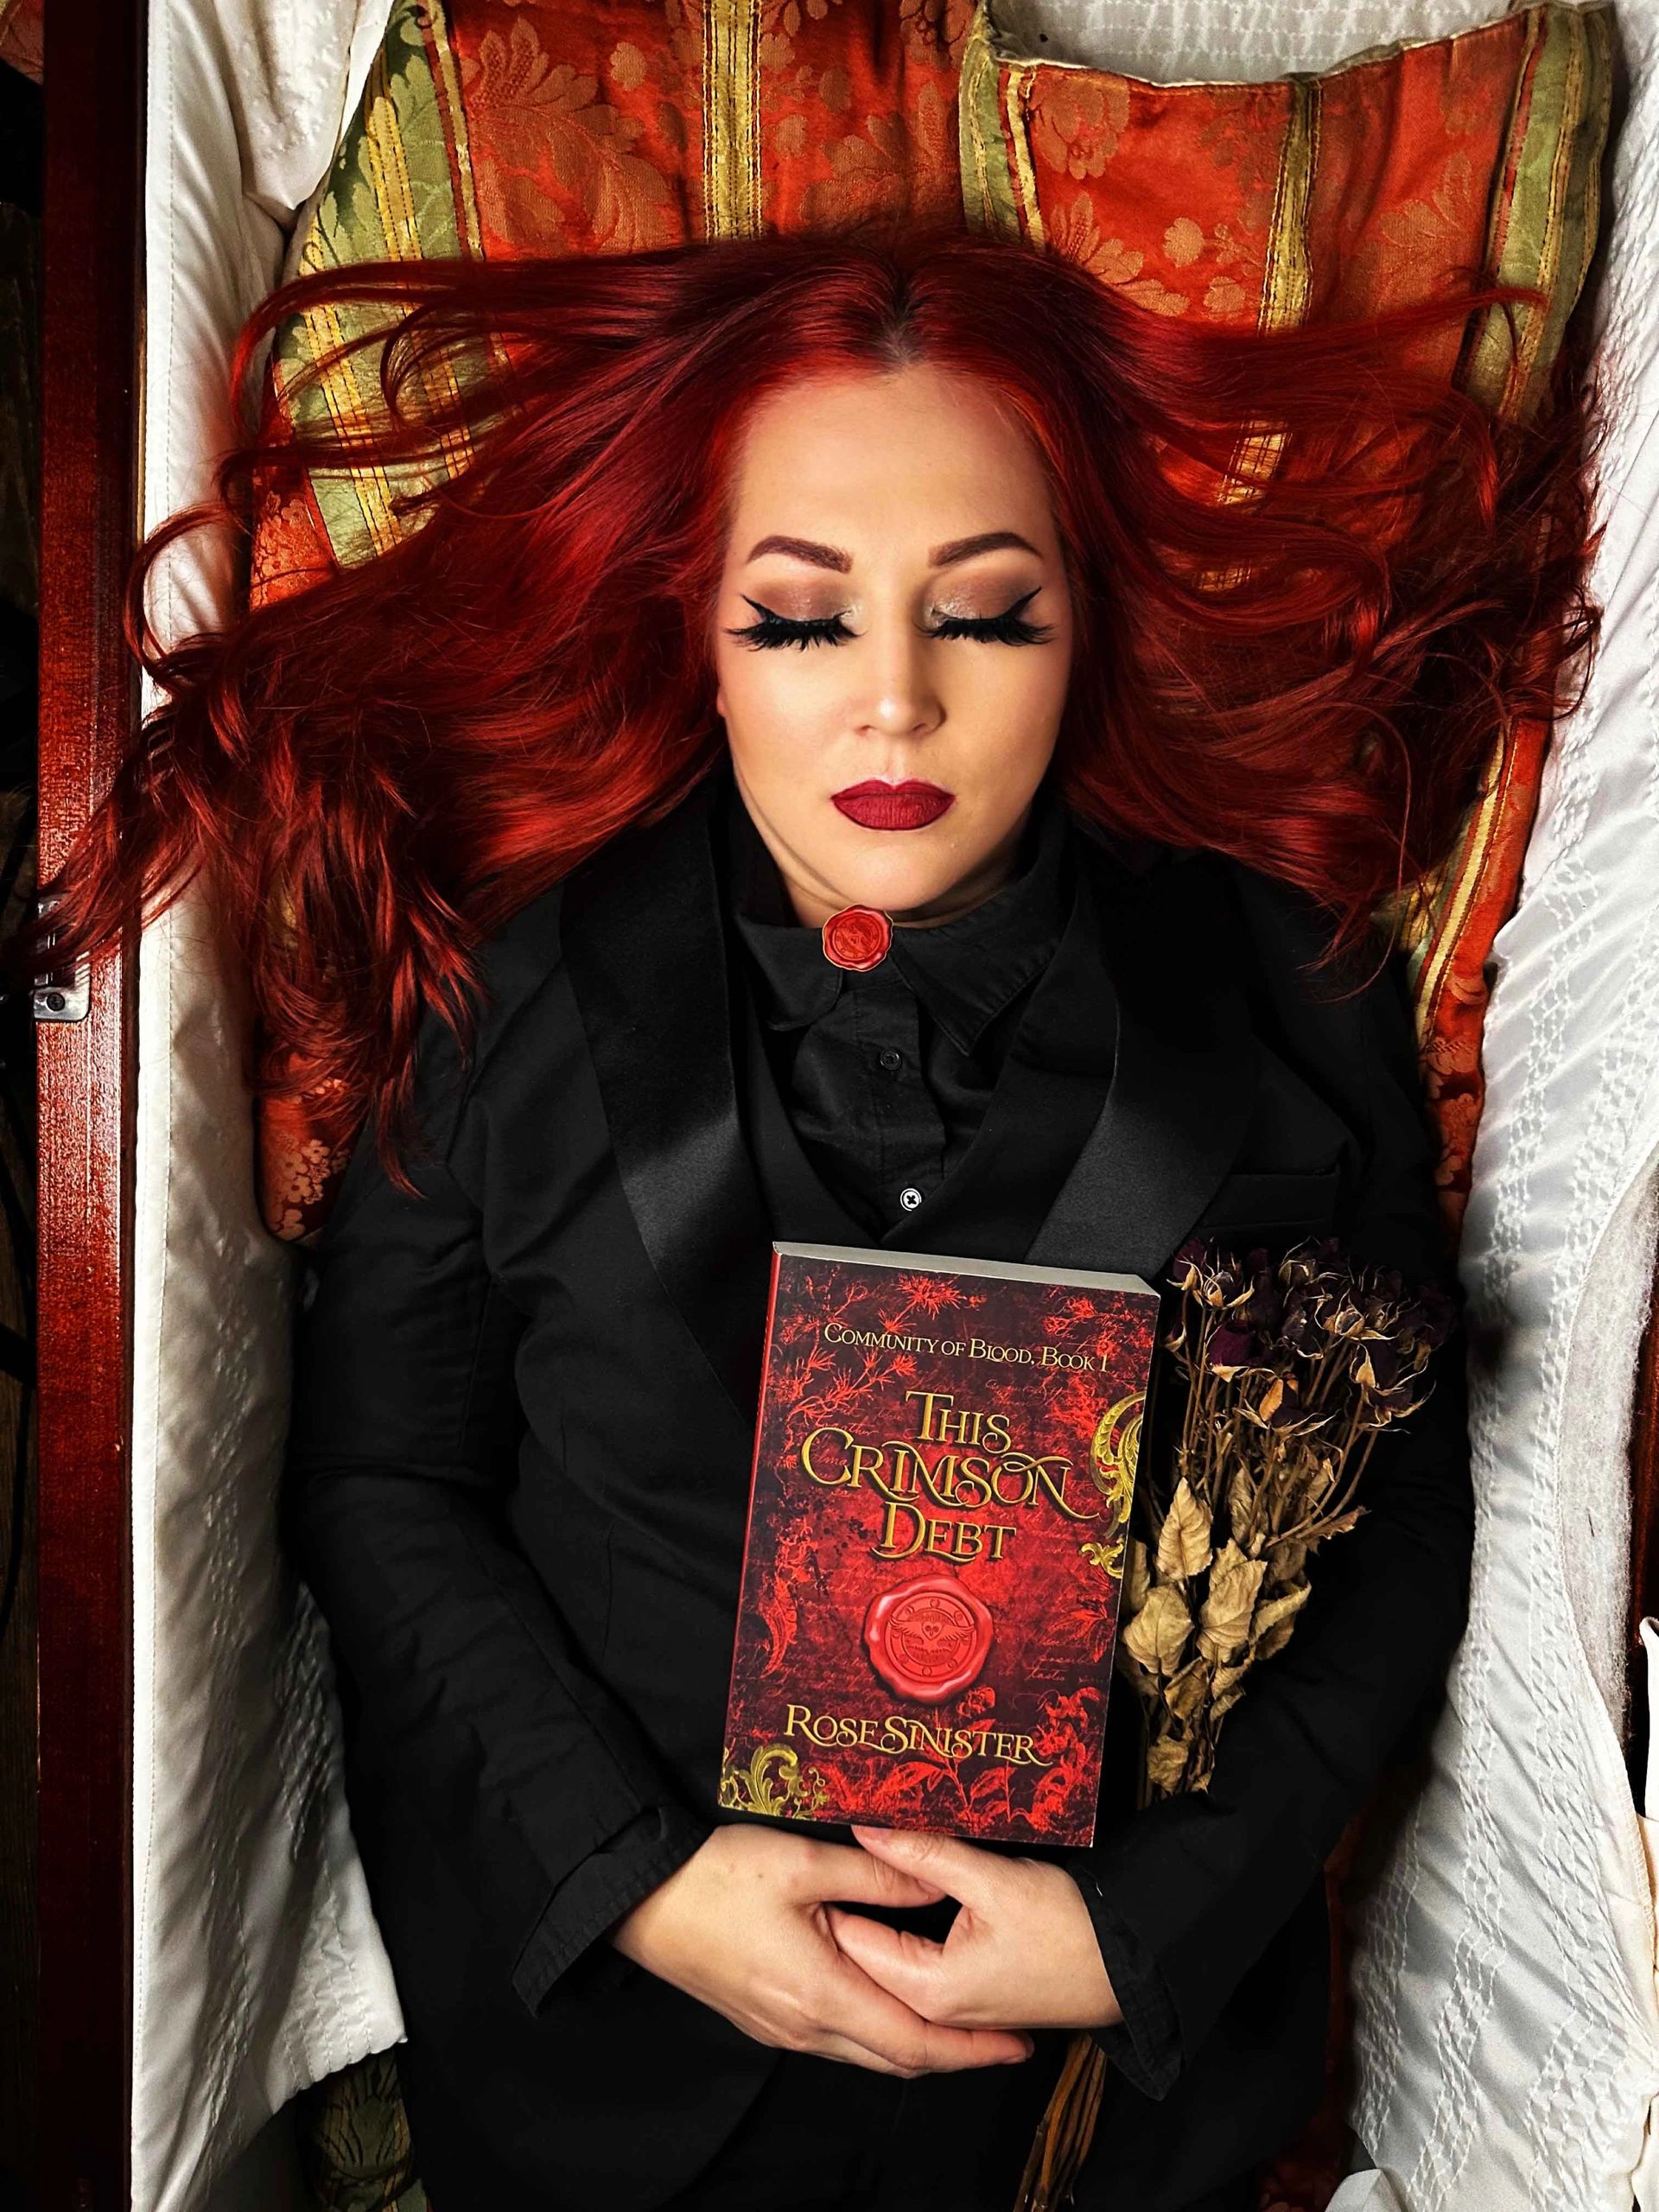 Interview with Rose Sinister